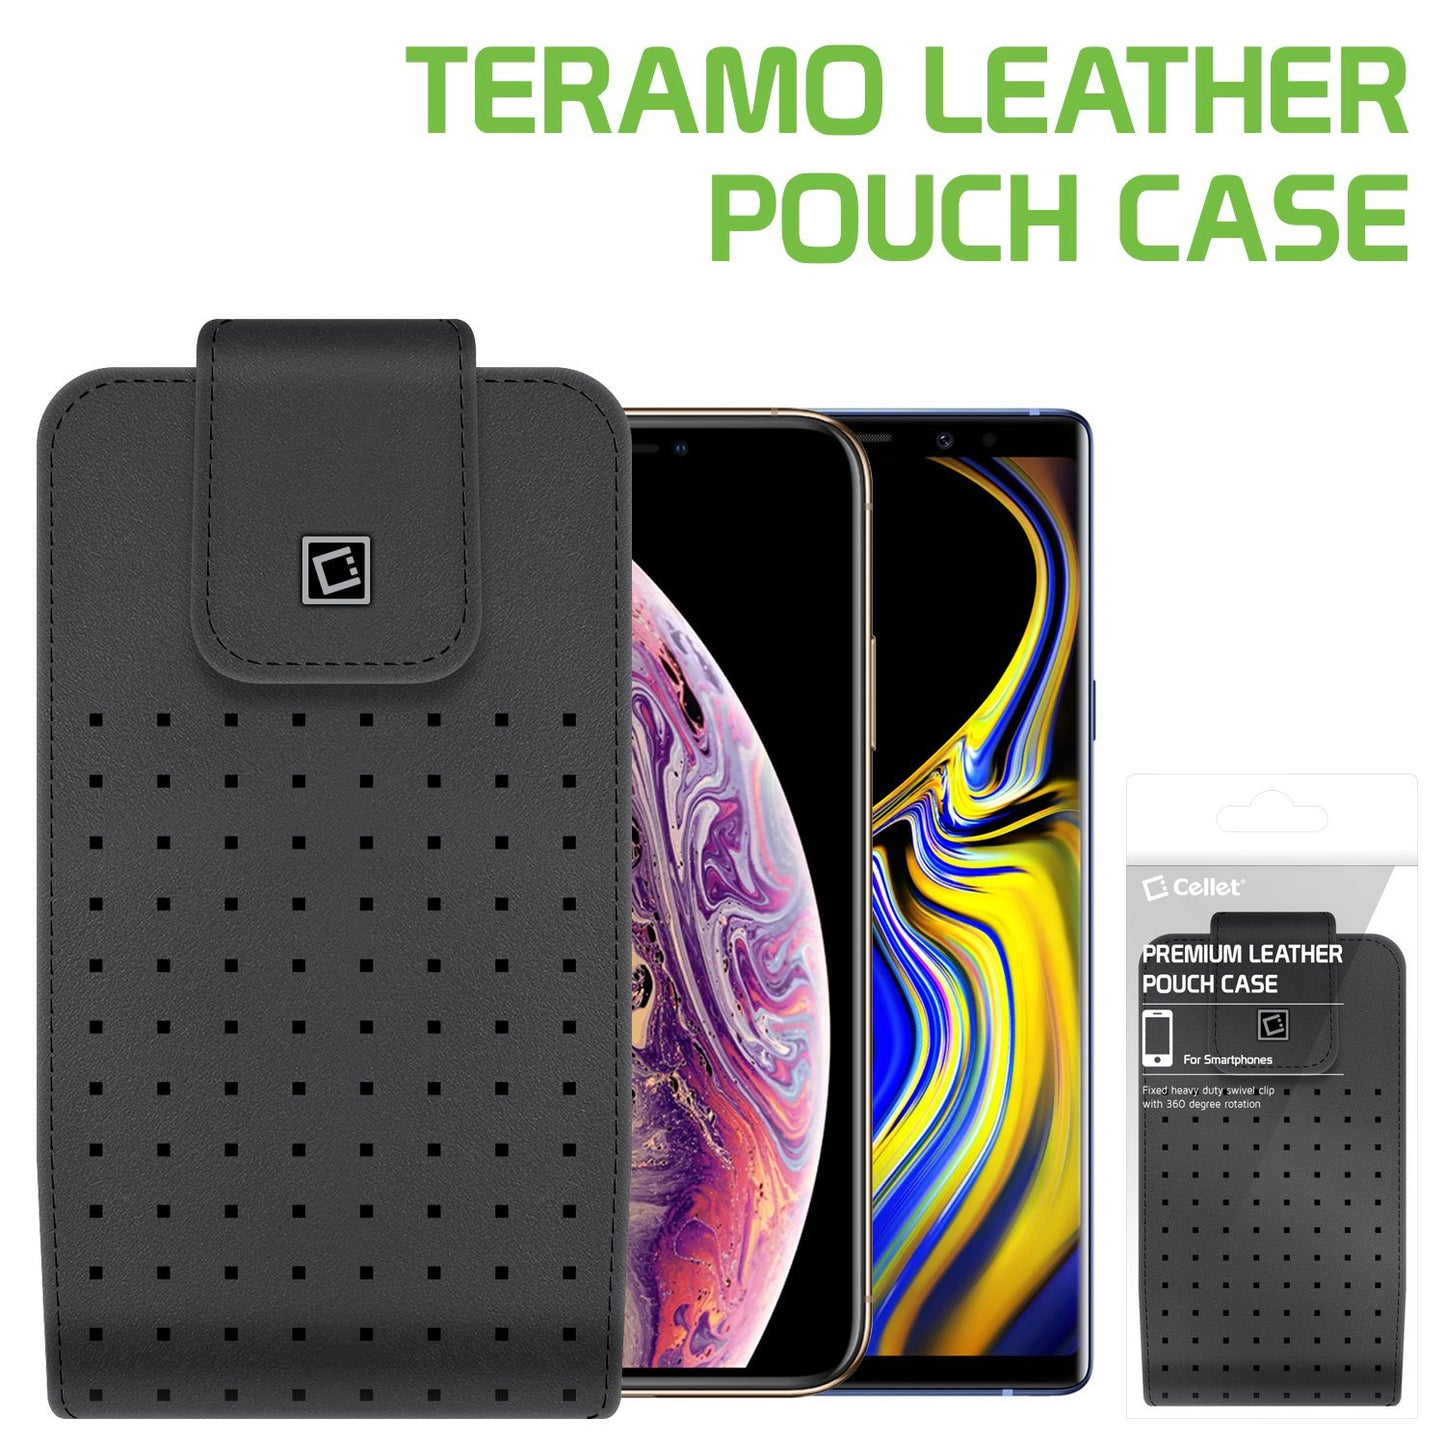 LTERLAGB -  Cellet Teramo Leather Pouch for Samsung Galaxy S9 Plus, Galaxy S8 Plus, iPhone 8 Plus, 7 Plus, 6S Plus and More(Fits with Slim Case On)